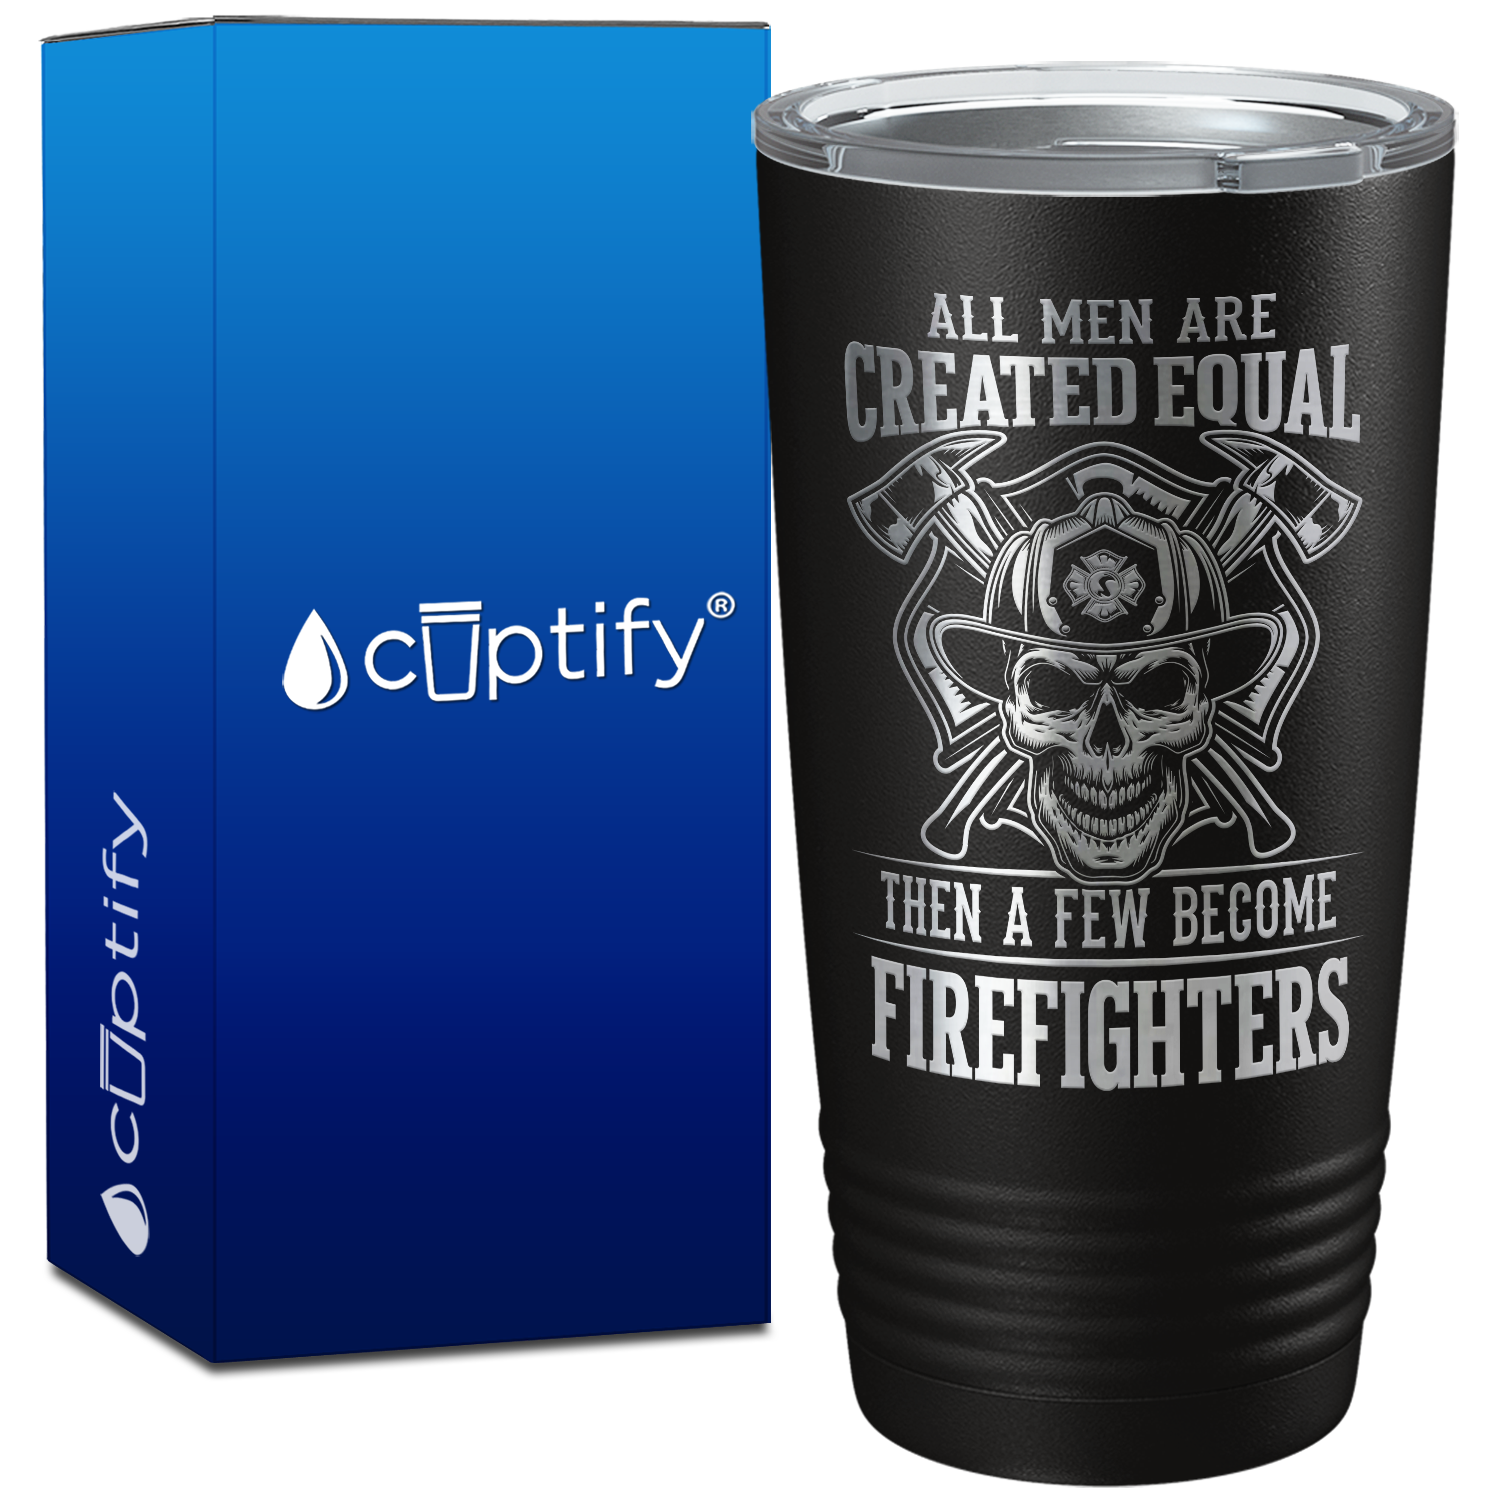 All Men Are Created Equal Then a Few Become Firefighters on 20oz Tumbler